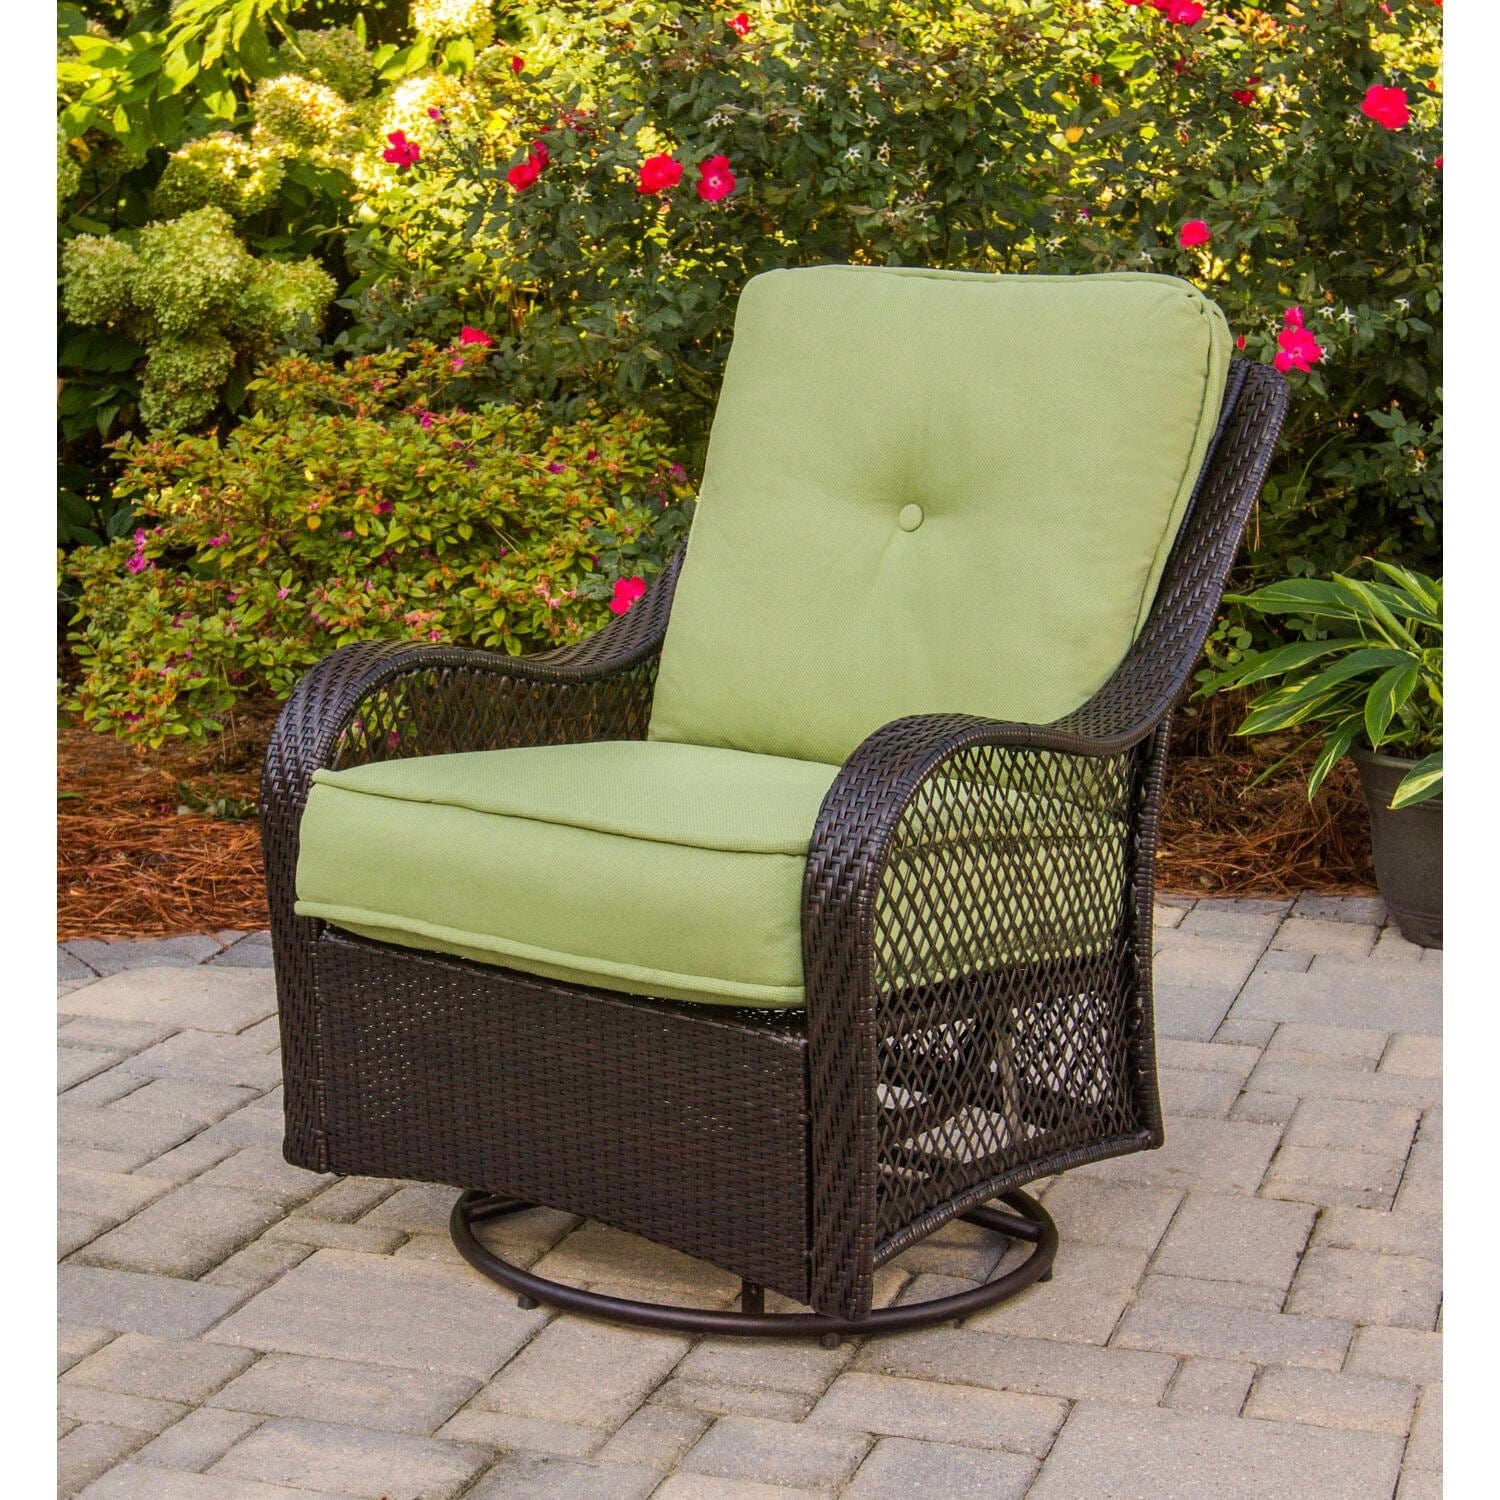 Hanover Fire Pit Chat Set Hanover Orleans 4-Piece Woven Fire Pit Lounge Set in Avocado Green with Sofa, 2 Swivel Gliders and Durastone Fire Pit | ORL4PCDFPSW2-GRN